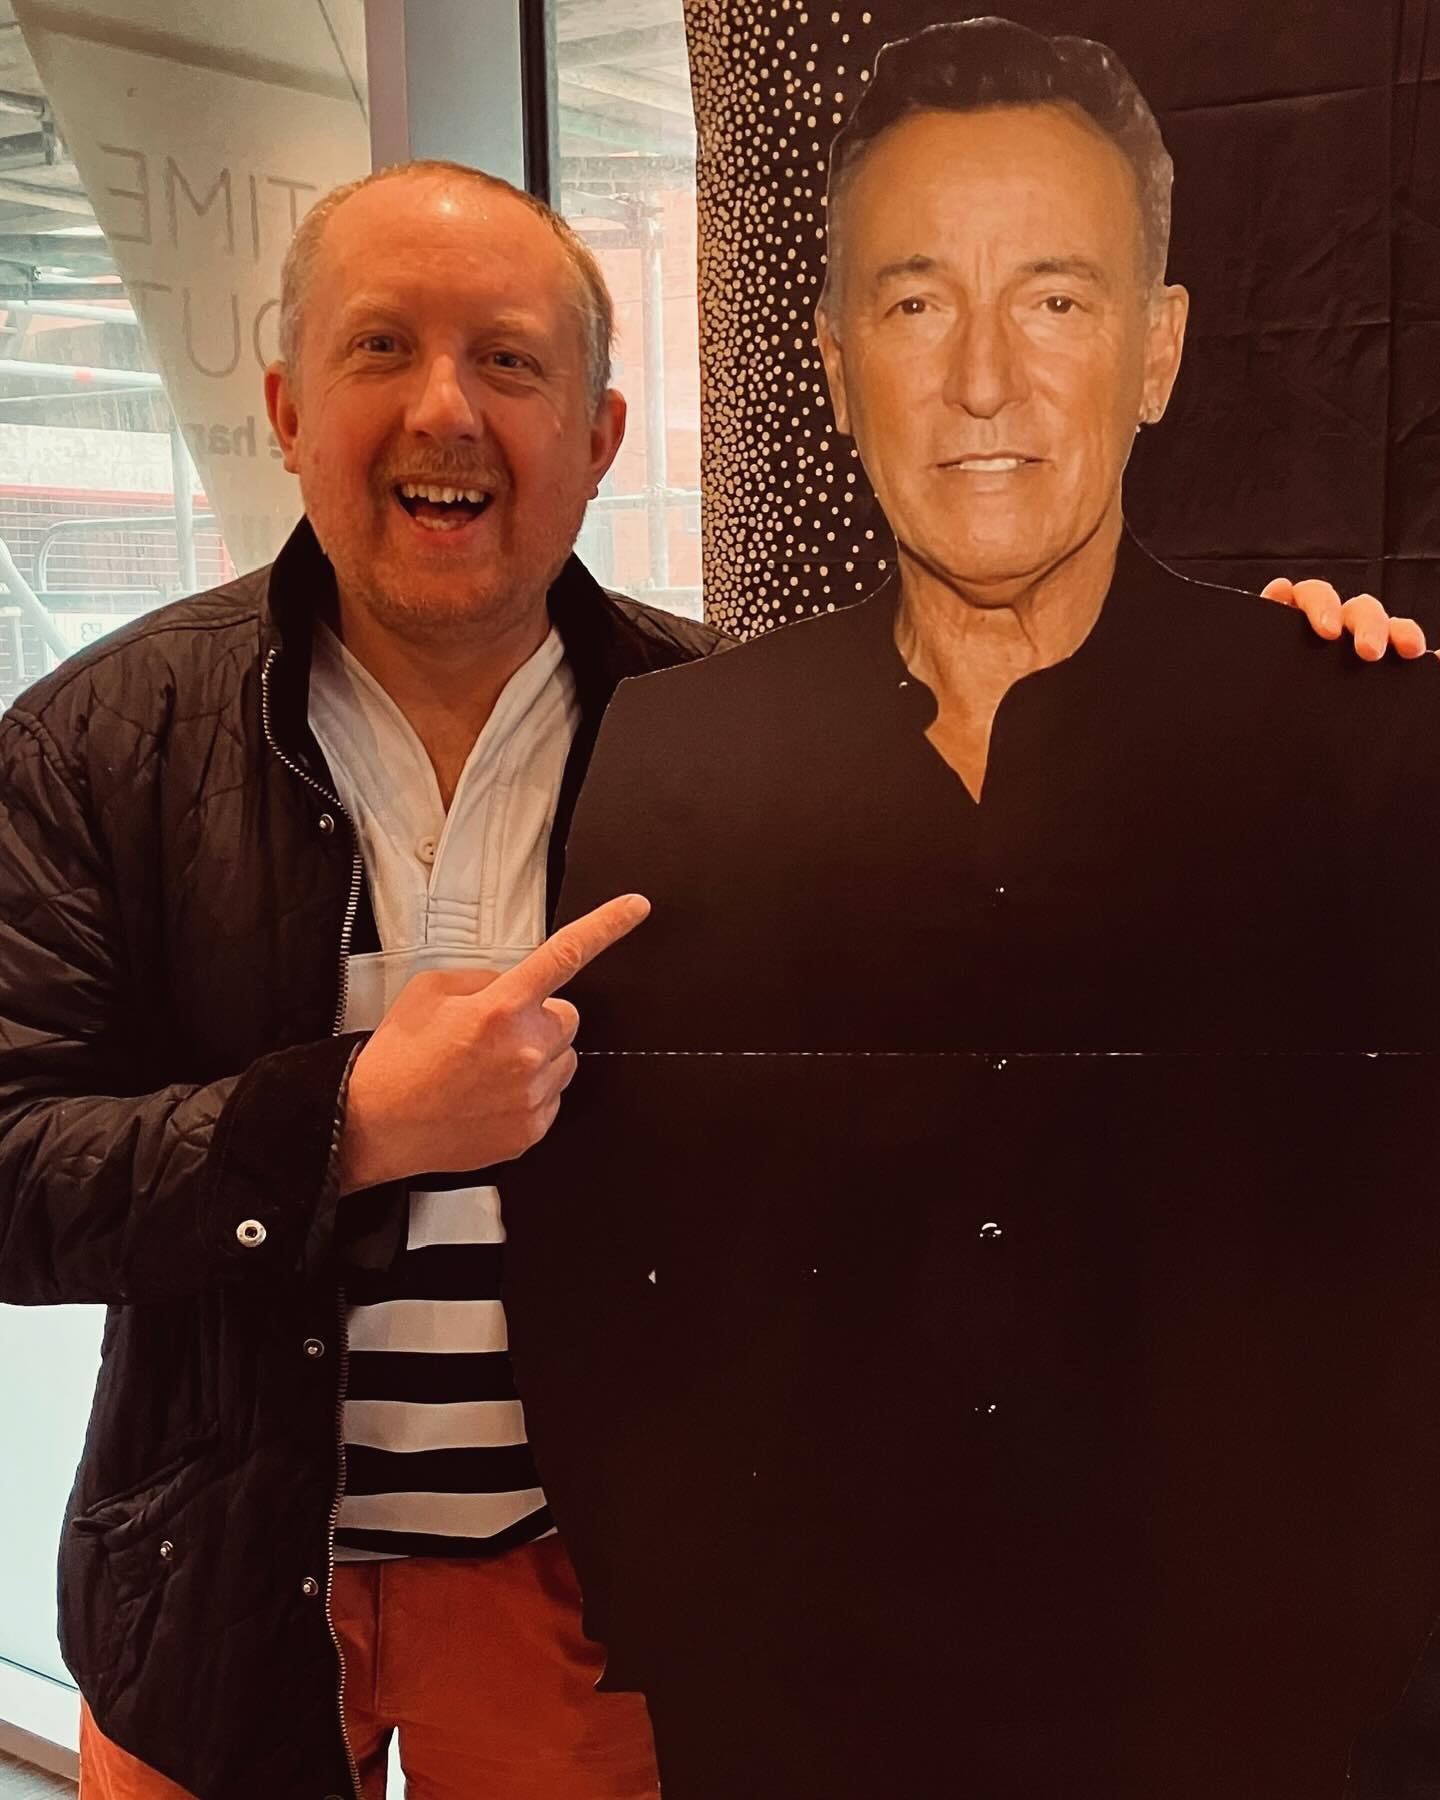 Bumped into the boss in Cardiff and he&rsquo;s a huge Bug Out fan and subscriber 
@springsteen